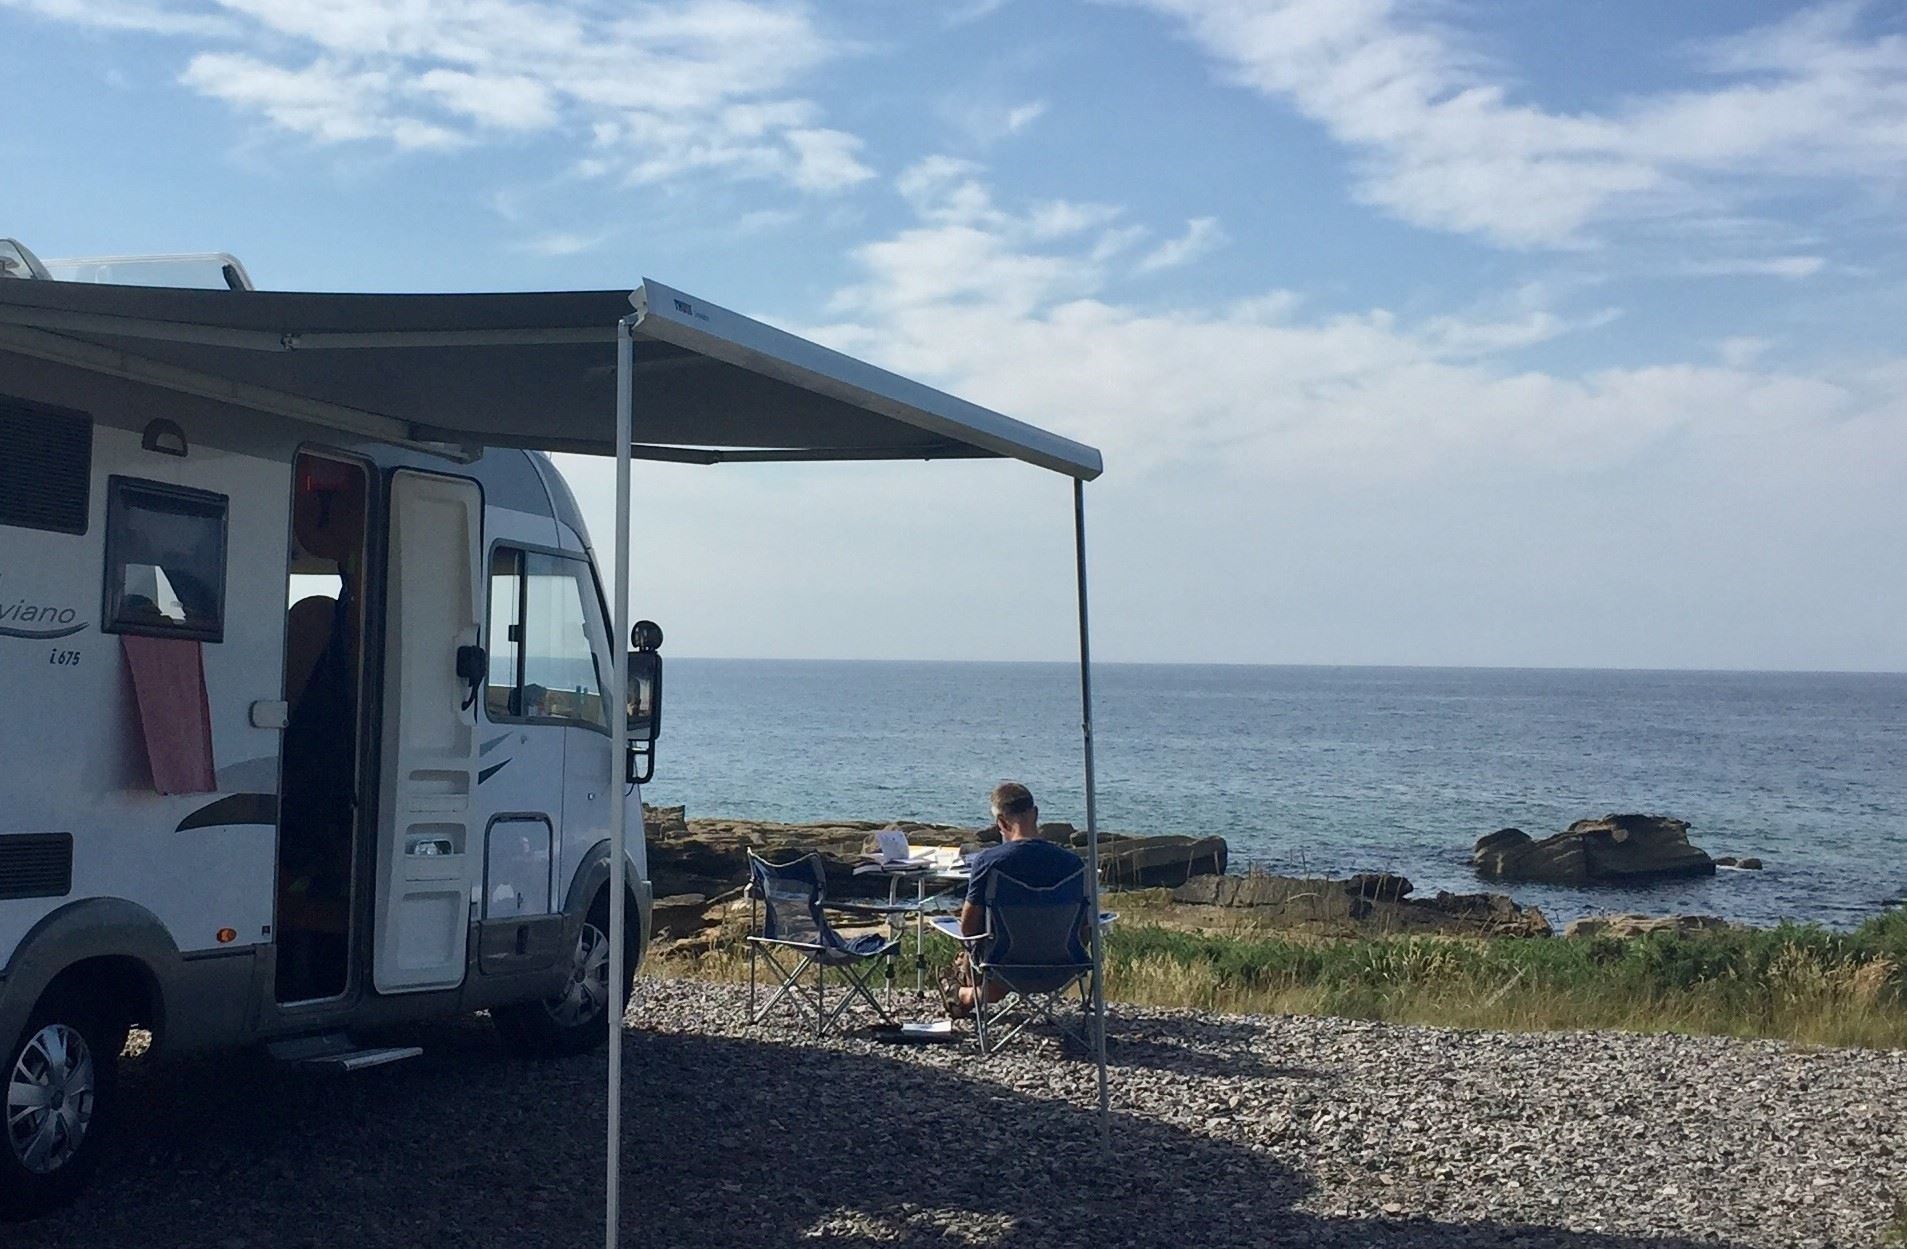 Nicky is looking forward to more motorhome holidays – when restrictions allow.